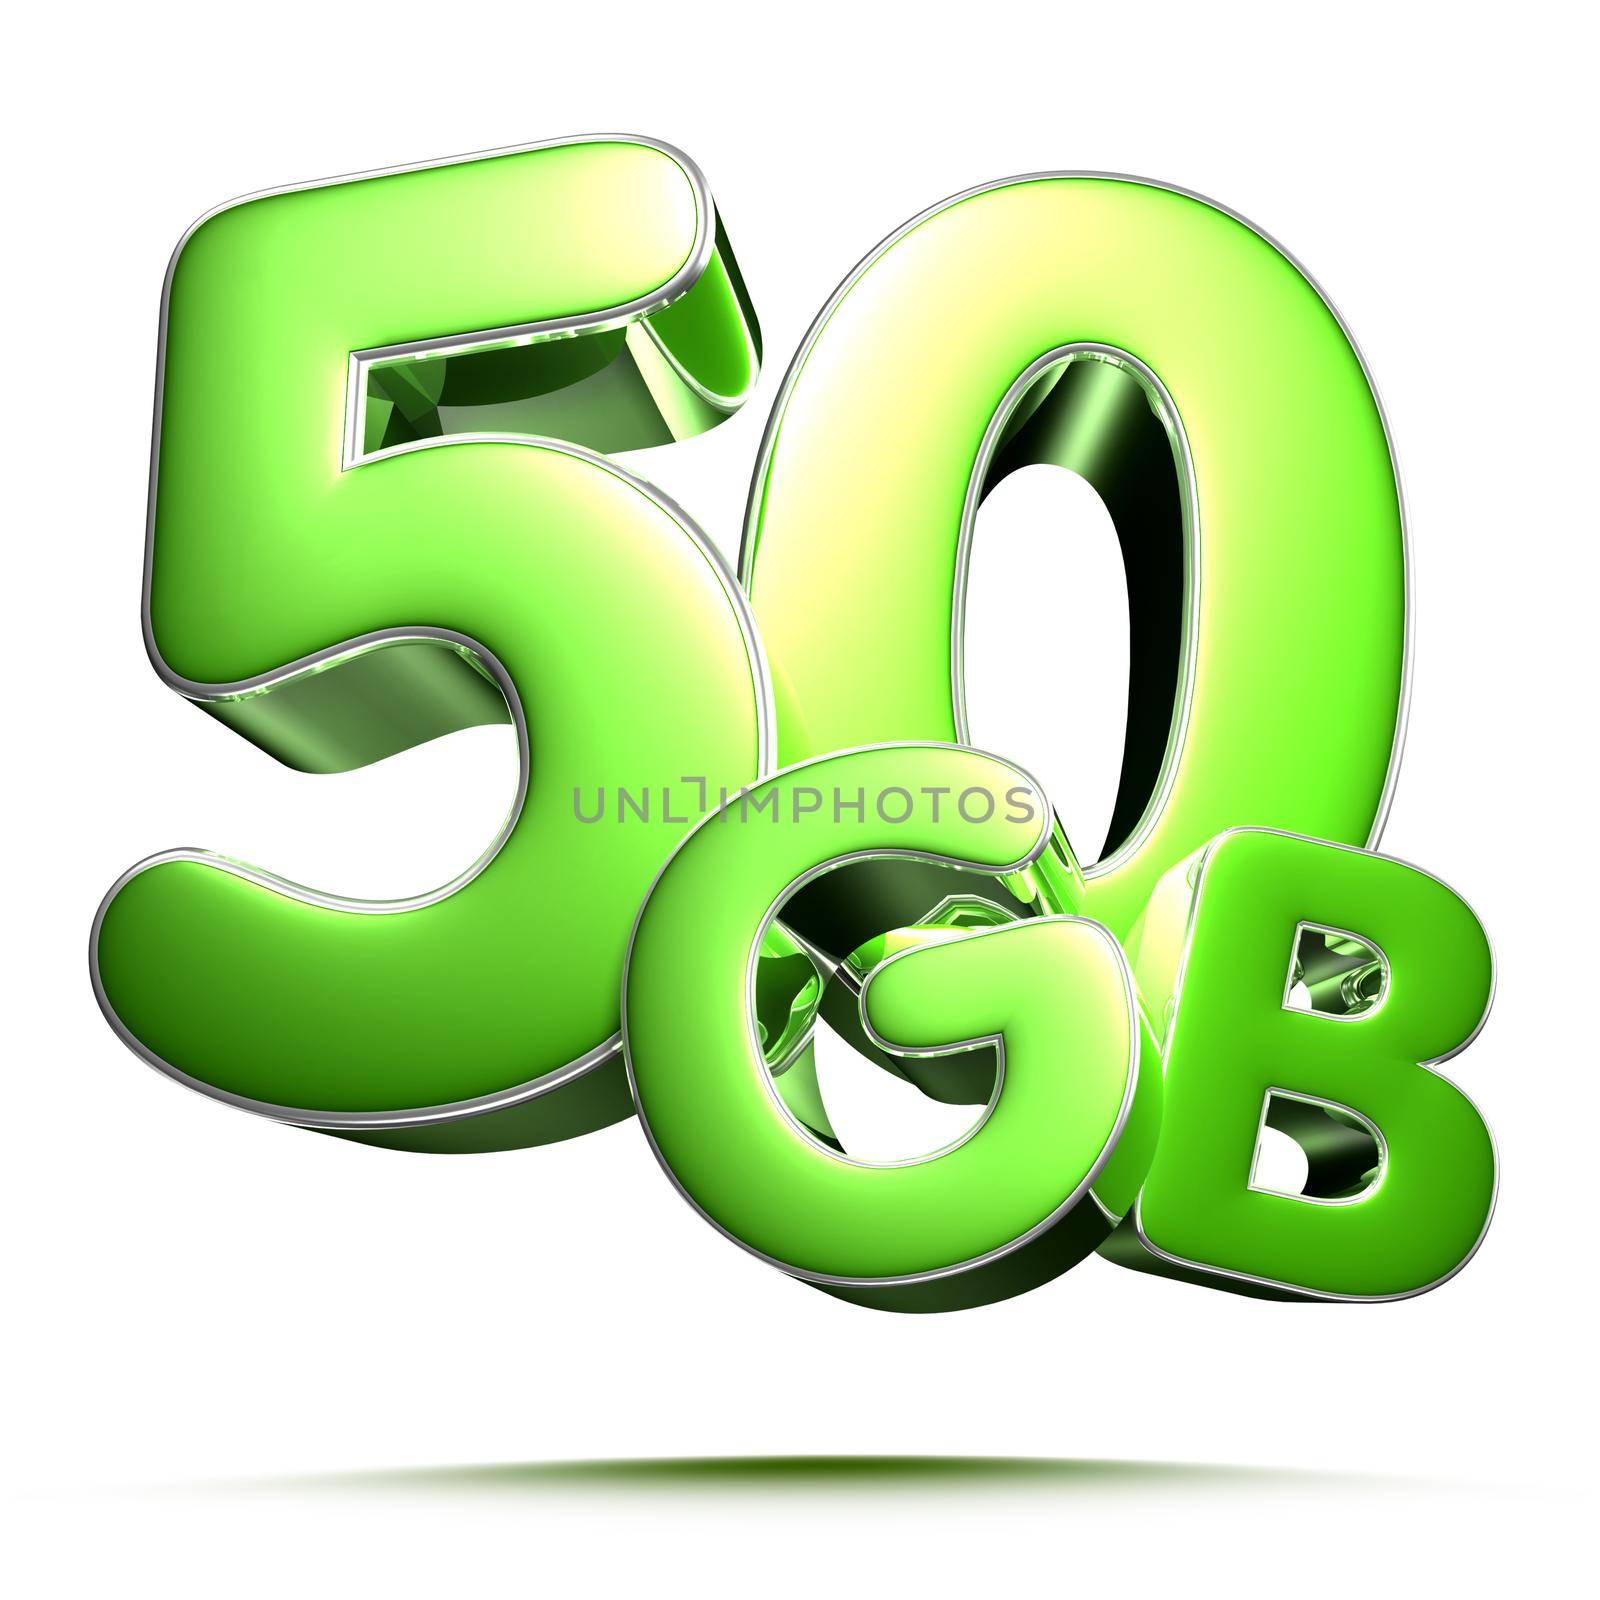 50 Gb green 3D illustration on white background with clipping path. by thitimontoyai